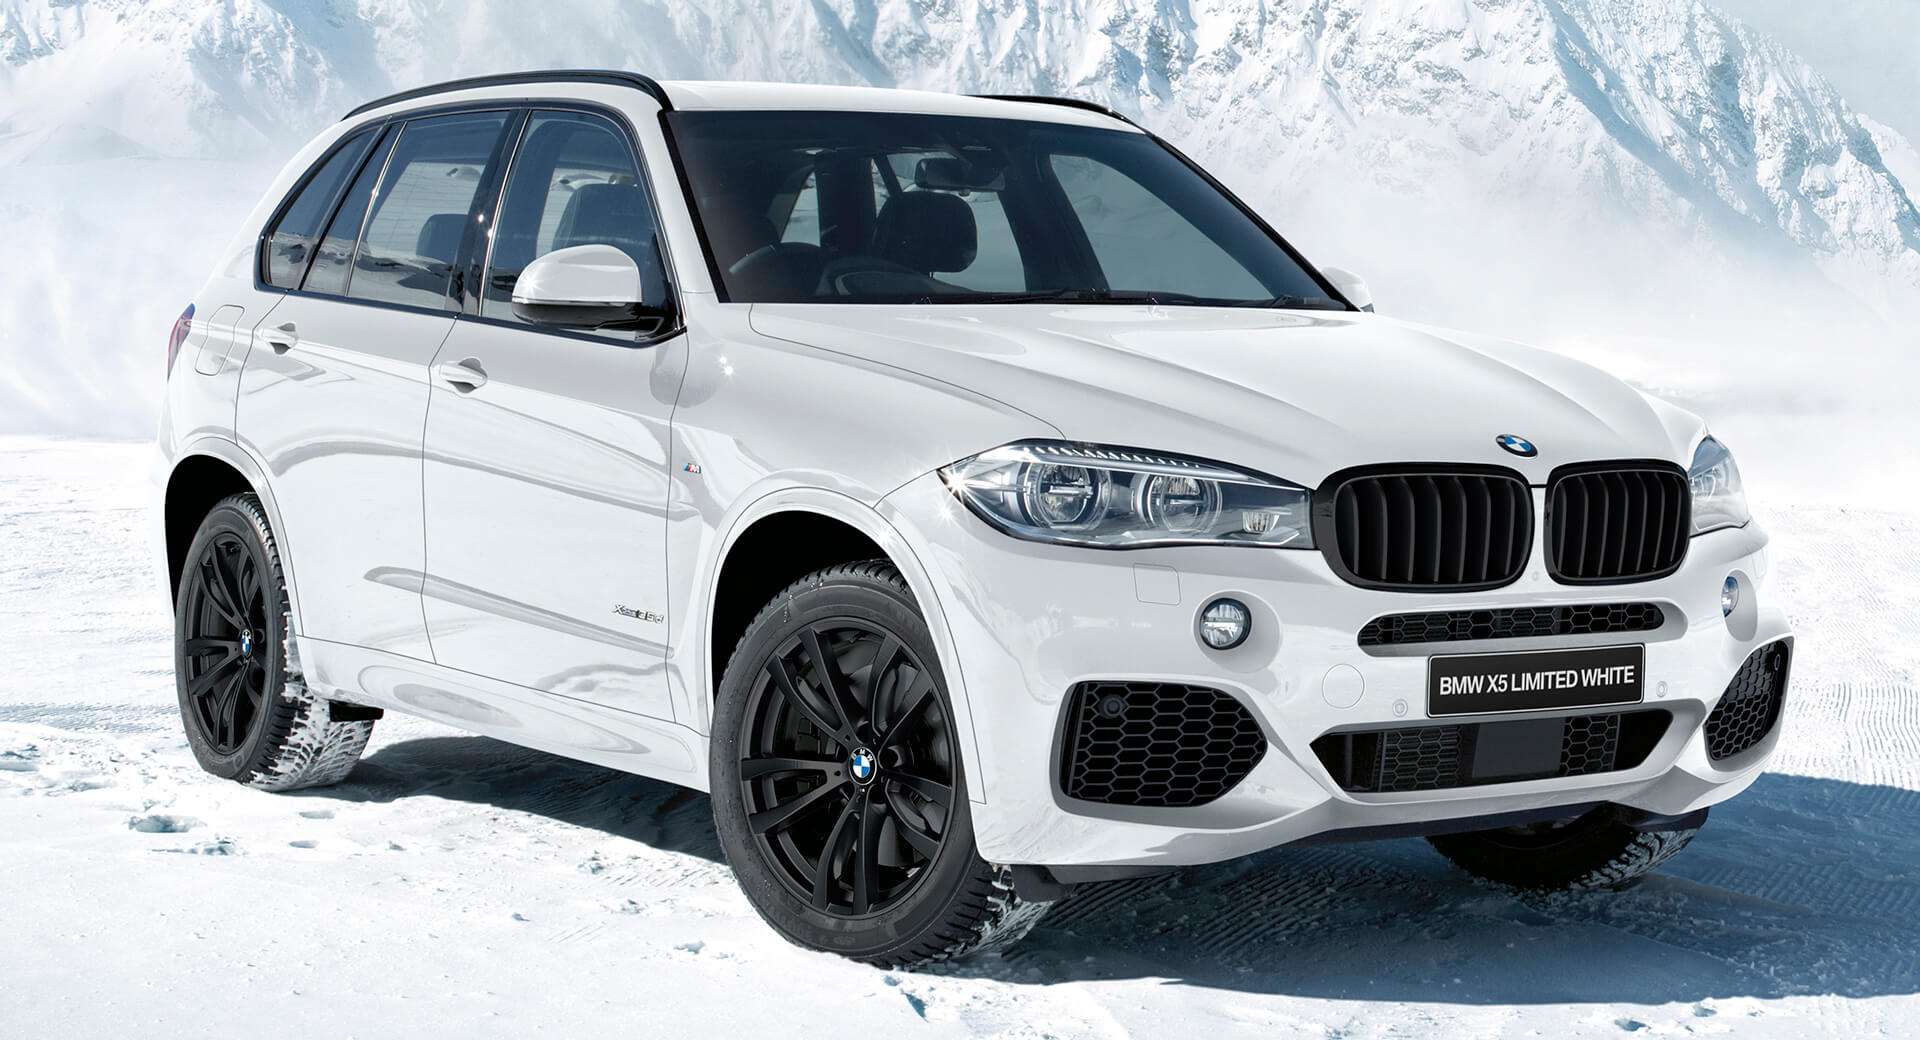 Bmw Japan Sends Off Previous X5 With Limited Black And White Editions |  Carscoops